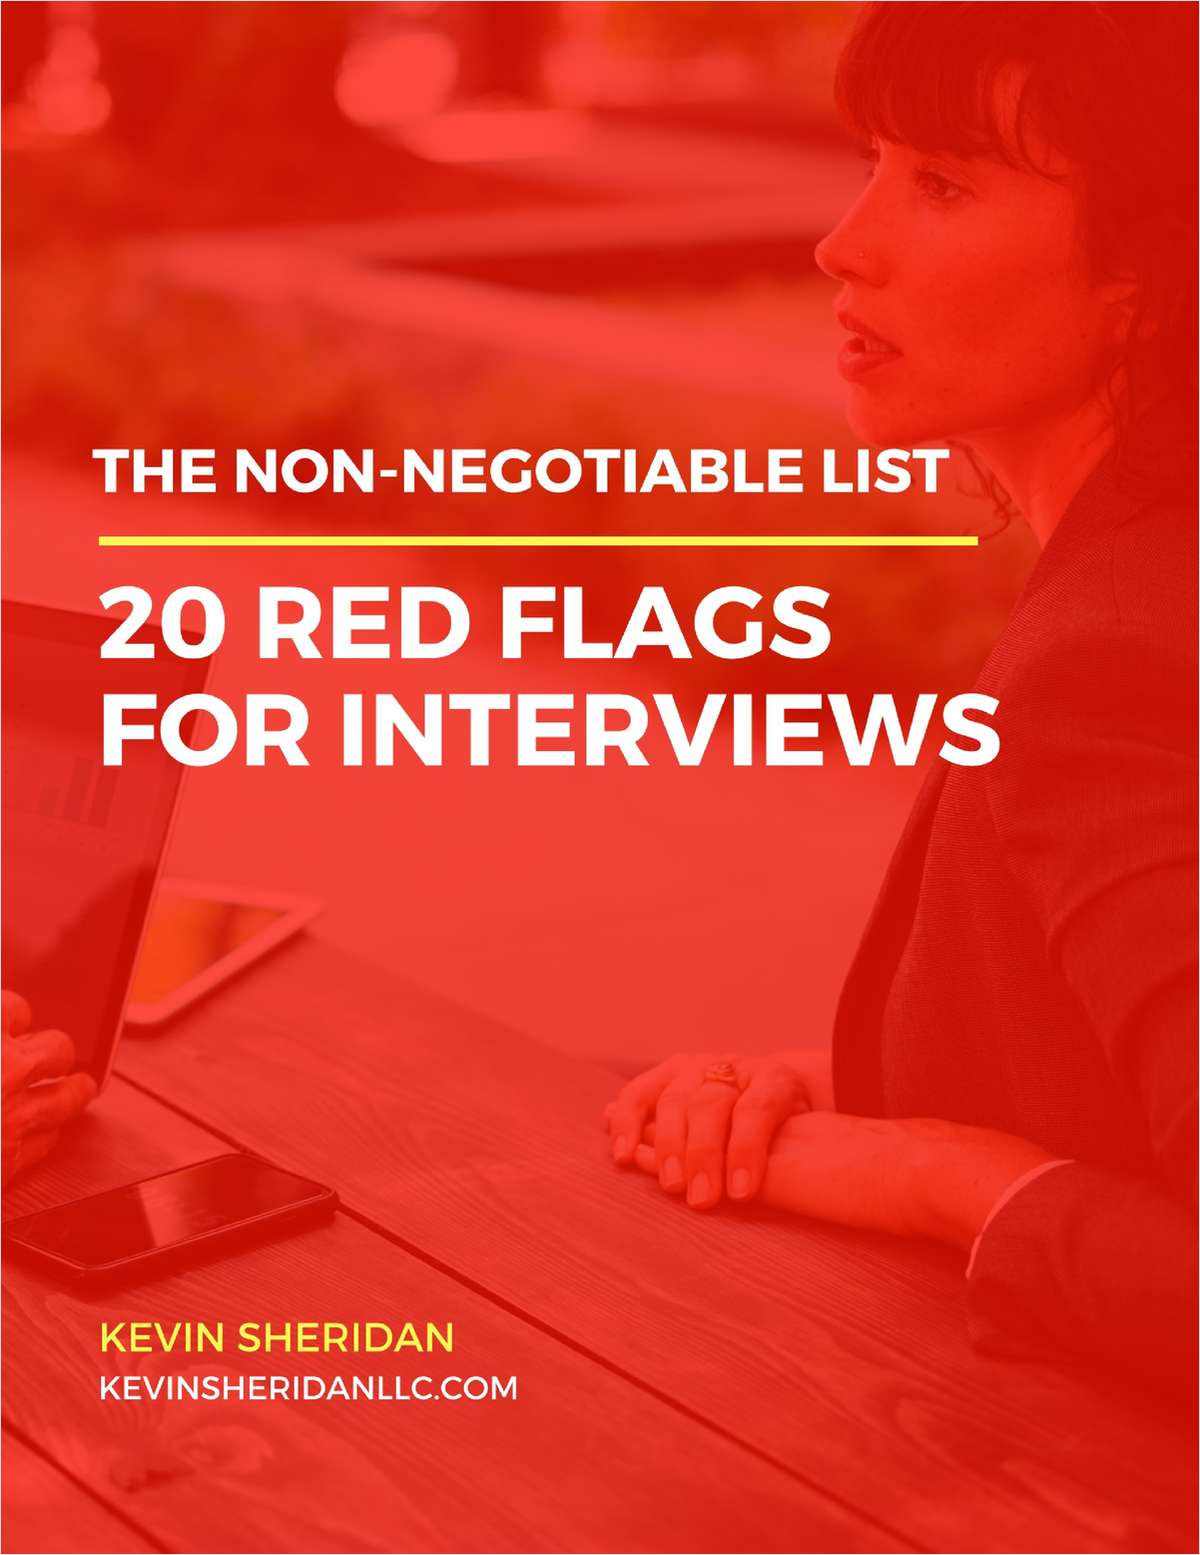 The Non-Negotiable List - 20 Red Flags For Interviews